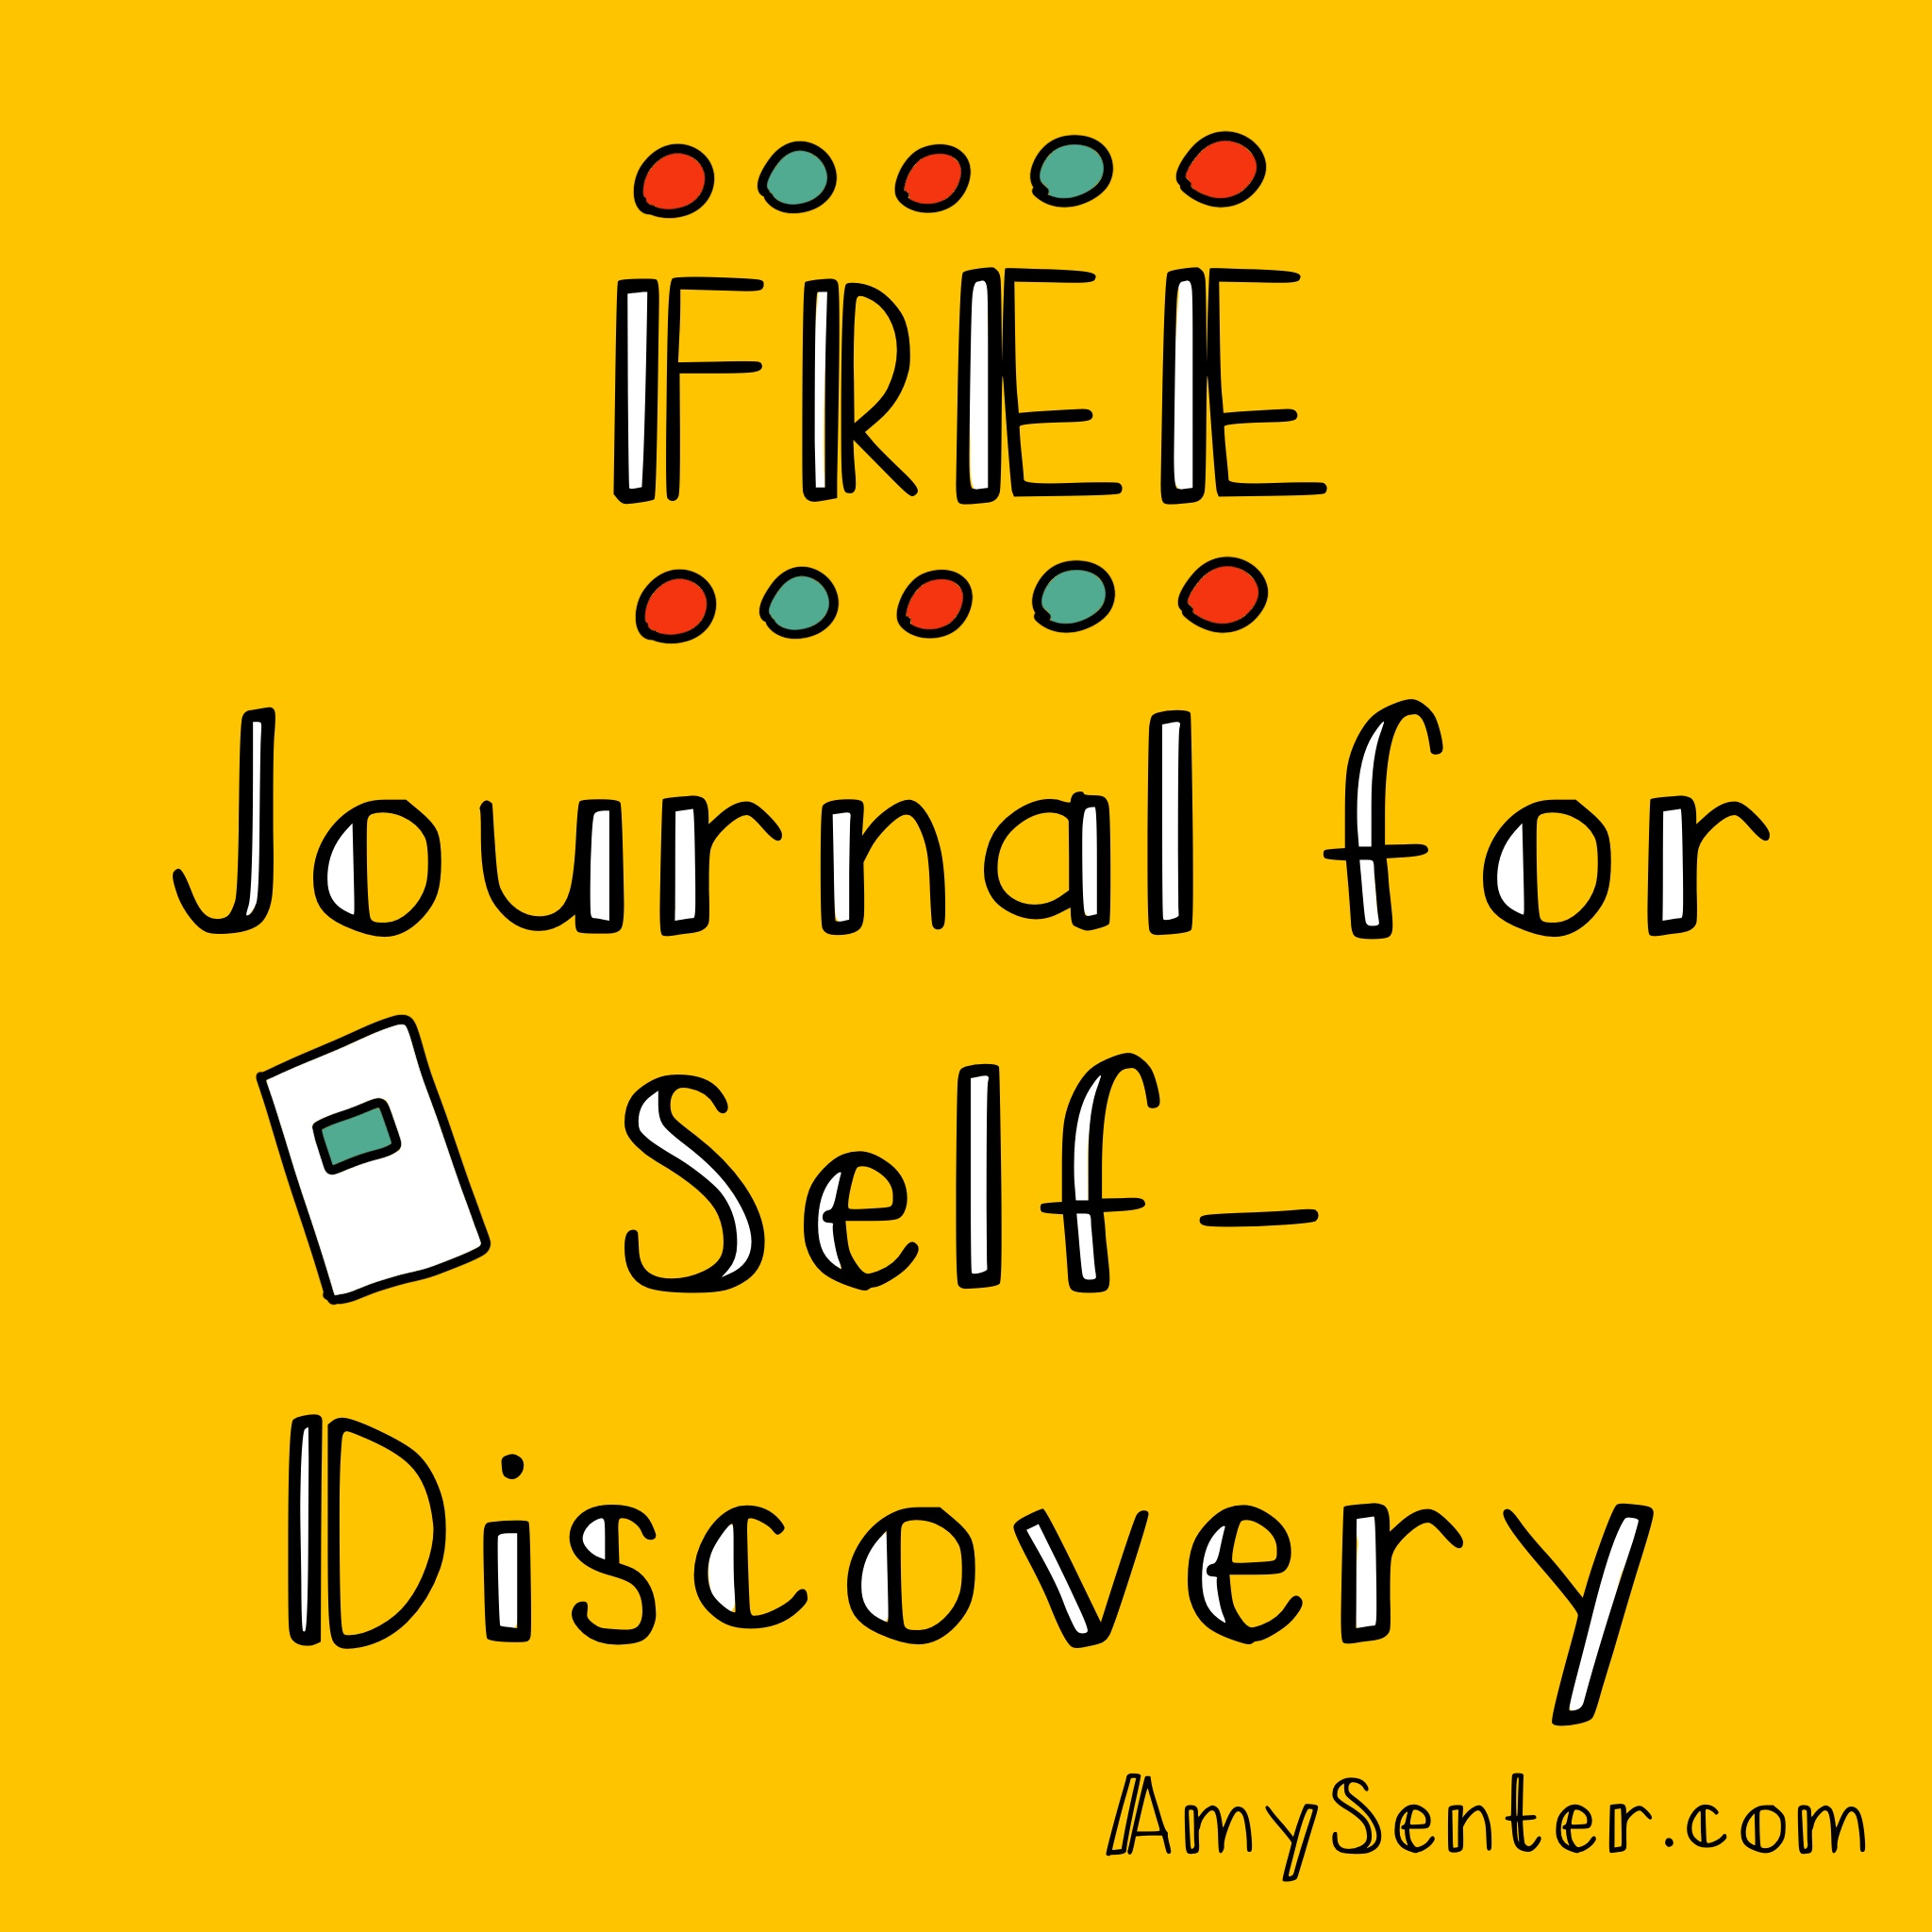 Print This Free Journal with Prompts for Self-Discovery